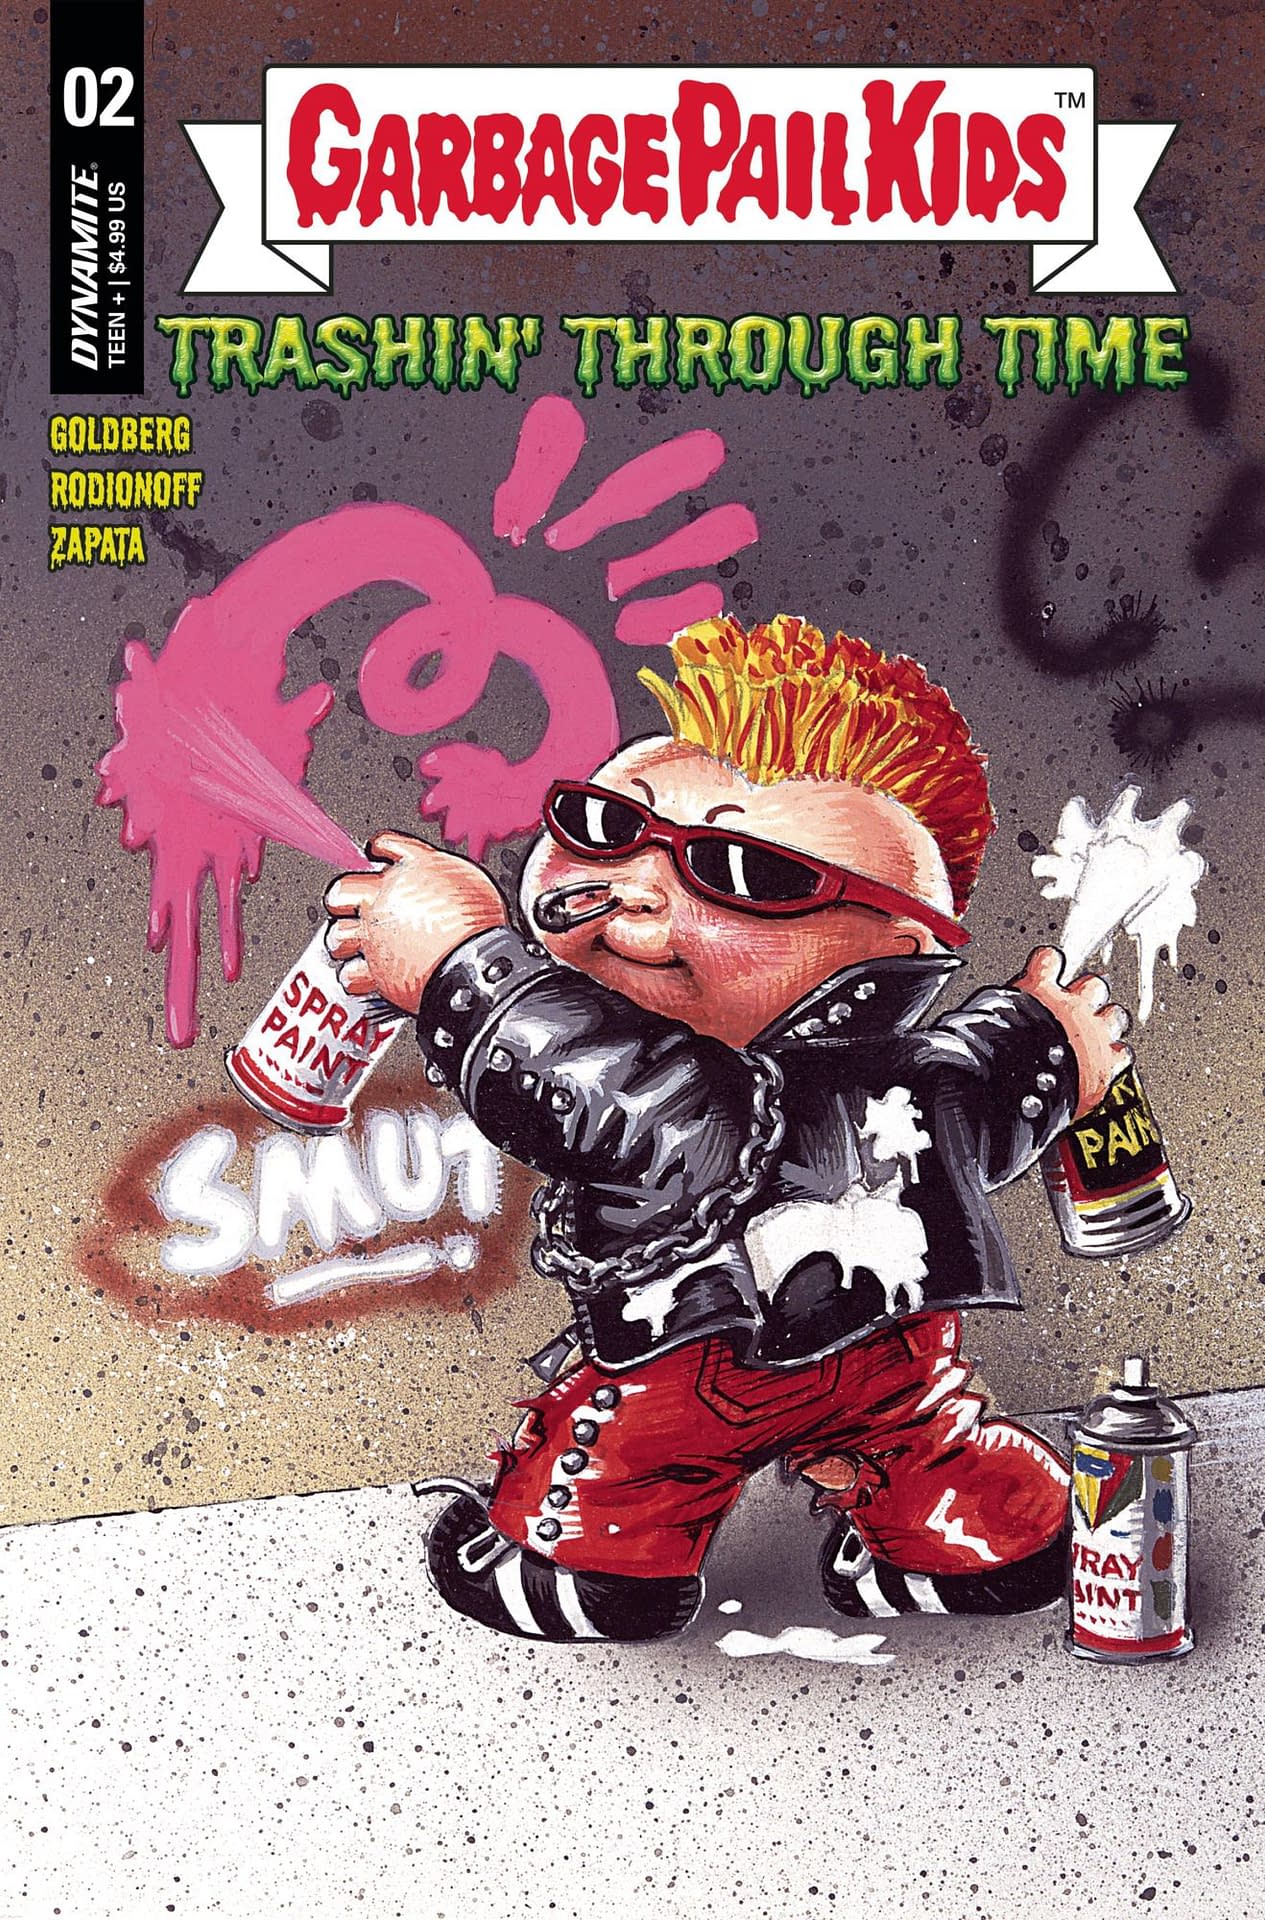 Cover image for GARBAGE PAIL KIDS THROUGH TIME #2 CVR D CLASSIC TRADING CARD